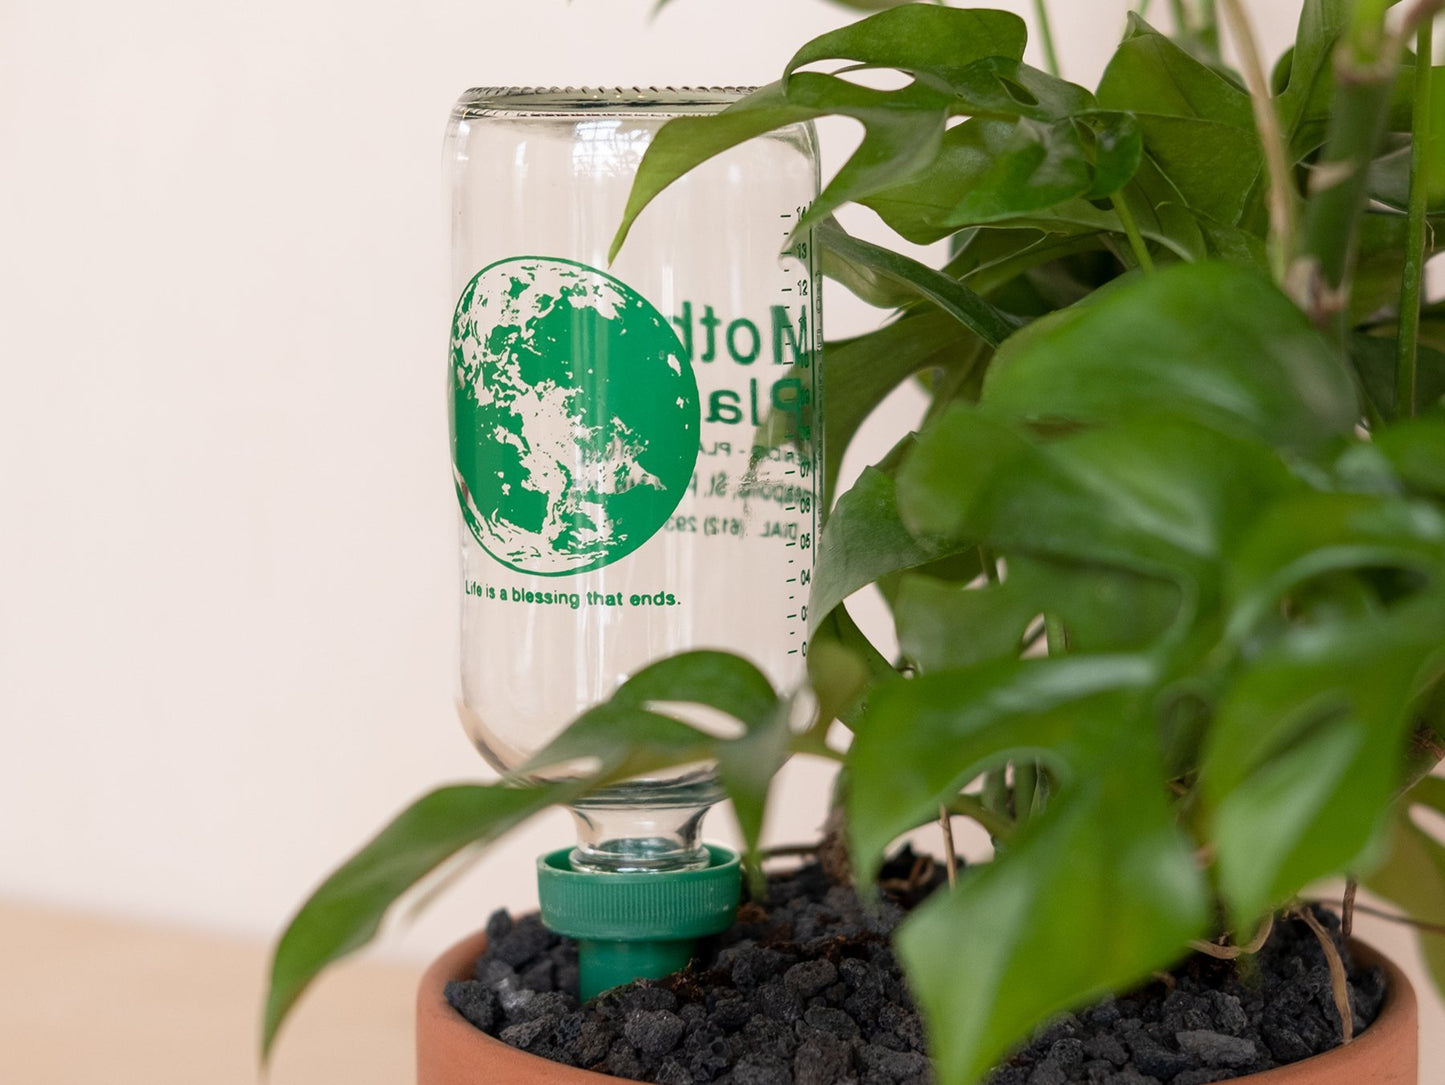 Self watering bottle for plants. Reduce, reuse, recycle! Going out of town? Fill this little puppy up and water will slowly disperse via osmosis through the ceramic tip into your plant buddy. BPA and BPS free.